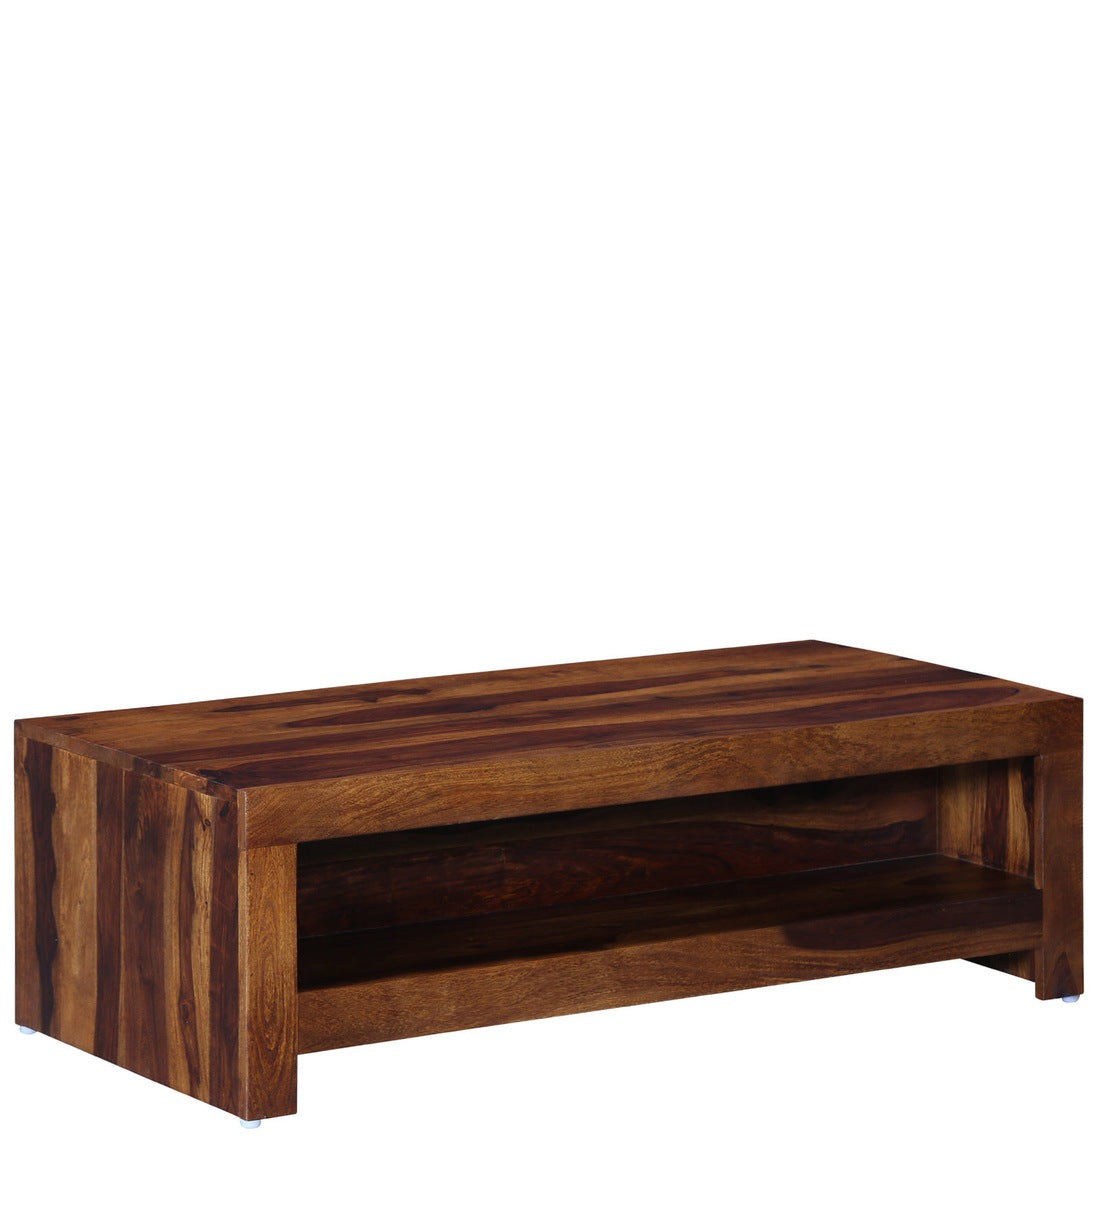 Acro Coffee Table Rectangle Center Table Wooden For Living Room - Rajwada Furnish